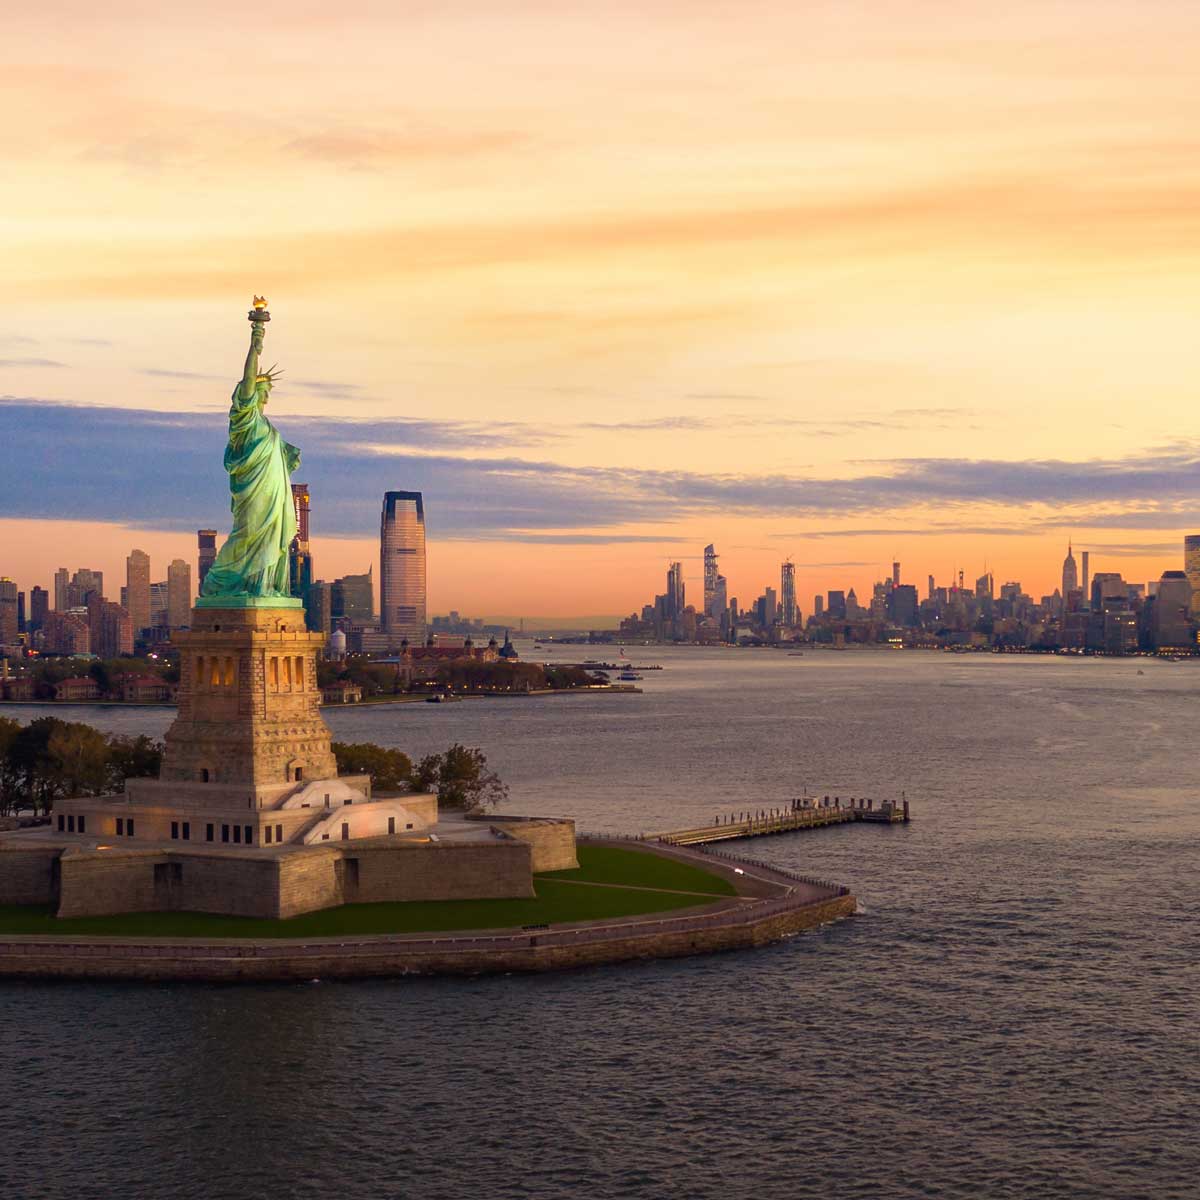 Liberty statue in New York city at sunset